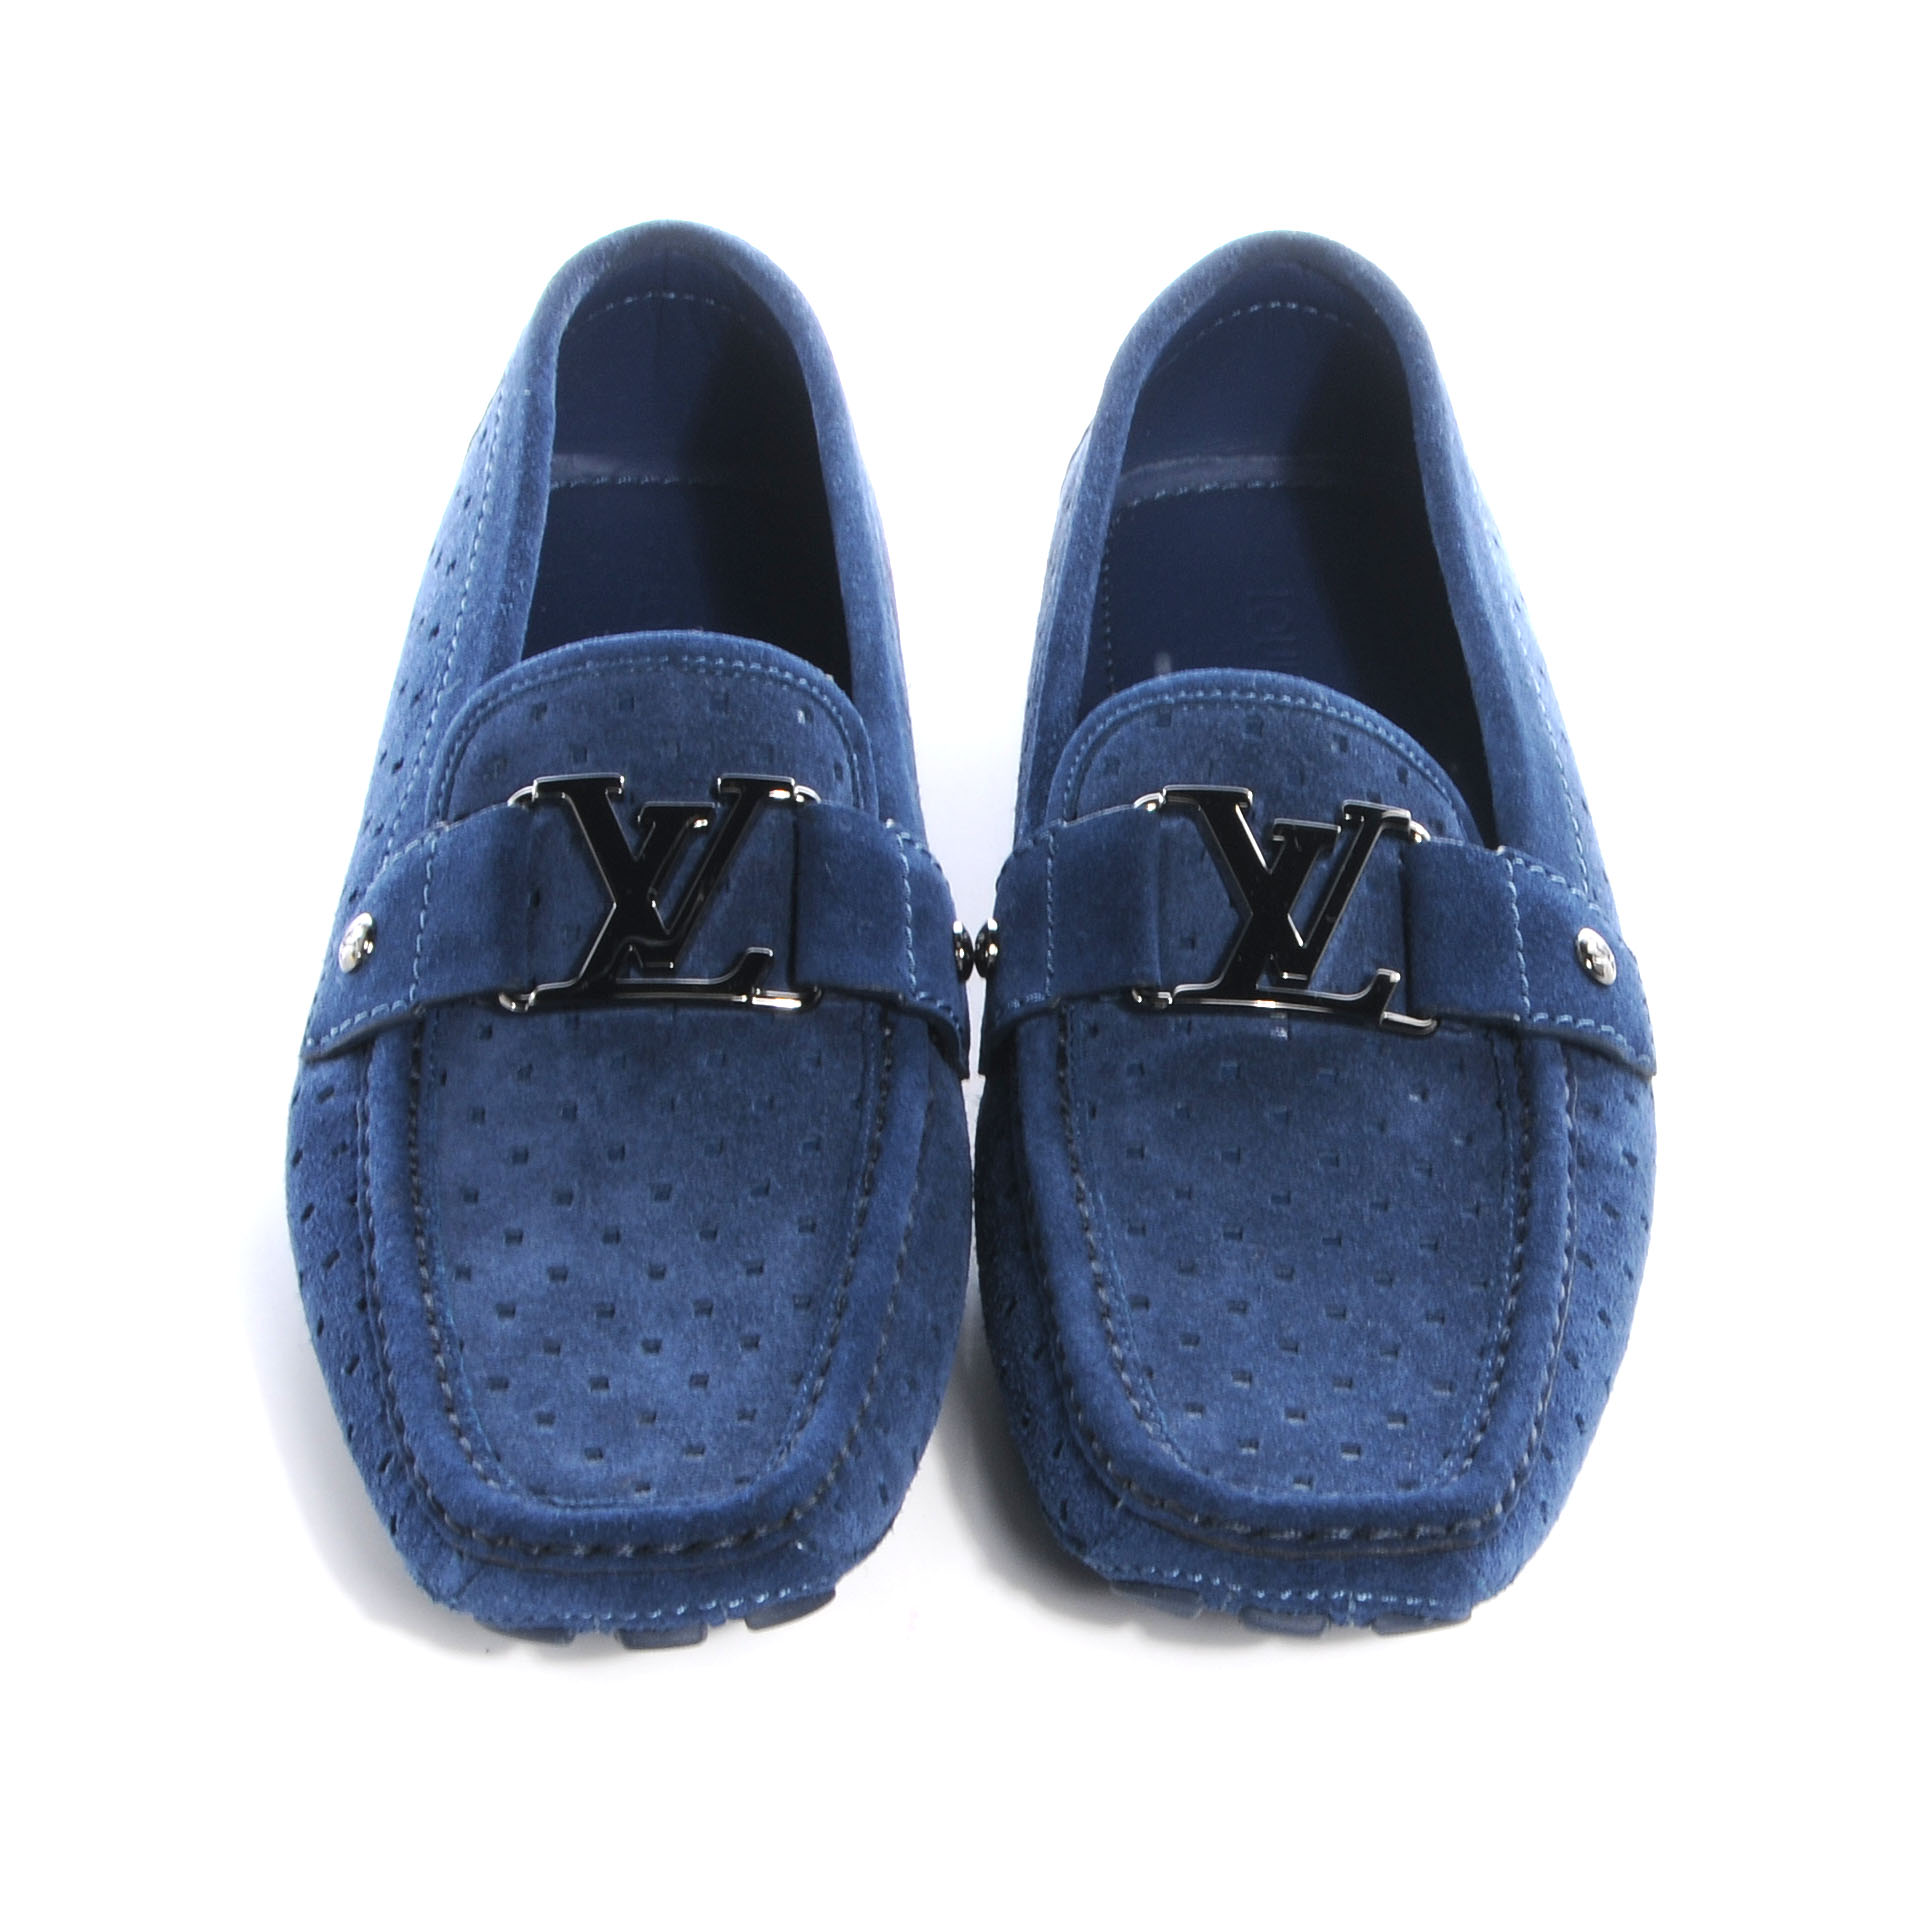 Louis Vuitton Suede Leather Loafer Mens Shoes Keweenaw Bay Indian Community